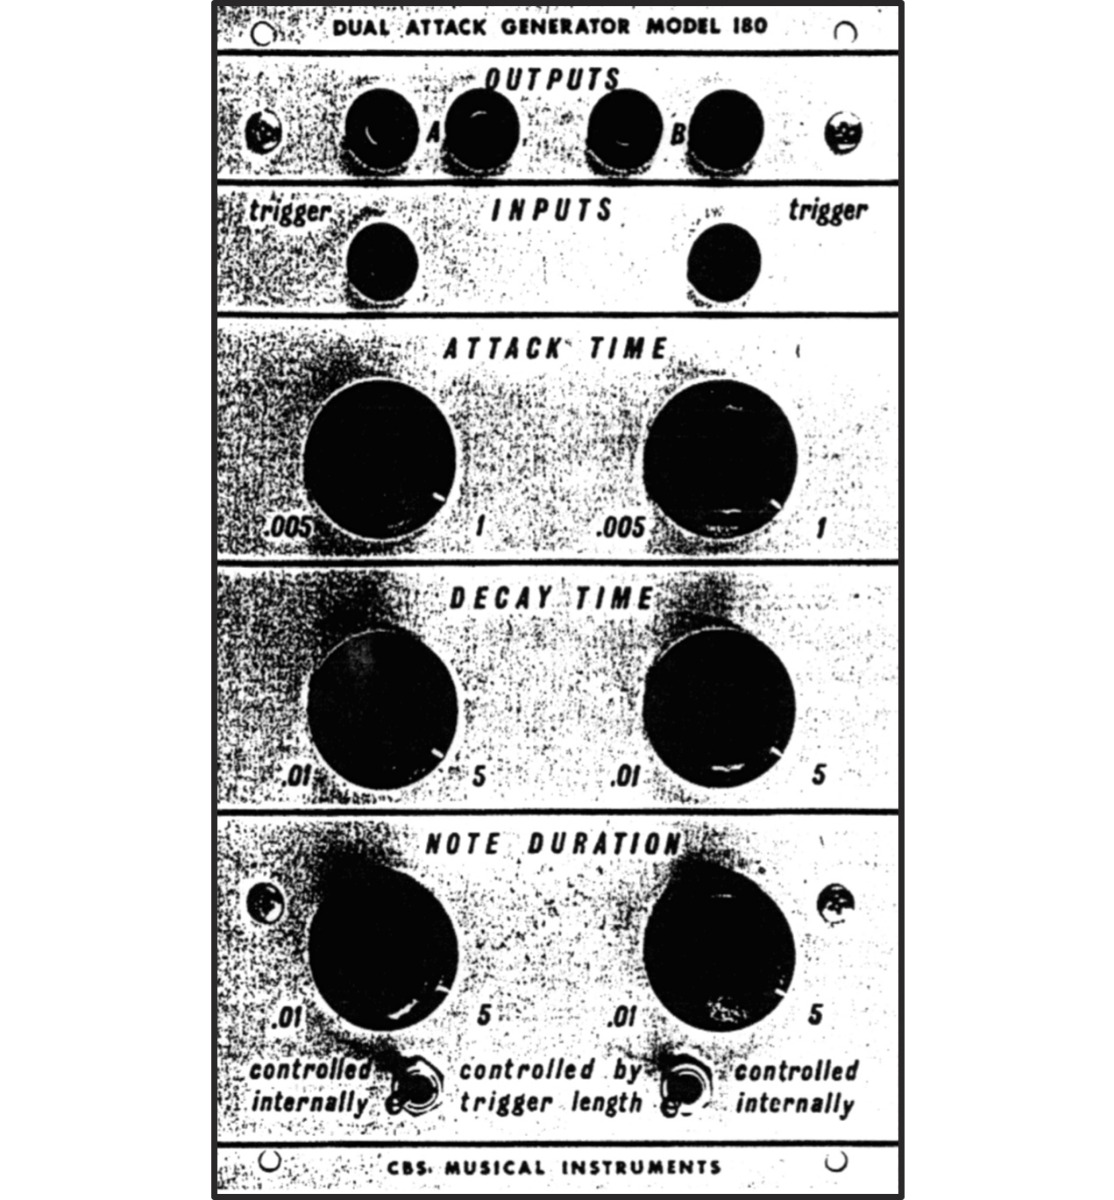 The 180 Dual Attack Generator, from the original CBS Musical Instruments Buchla catalog.